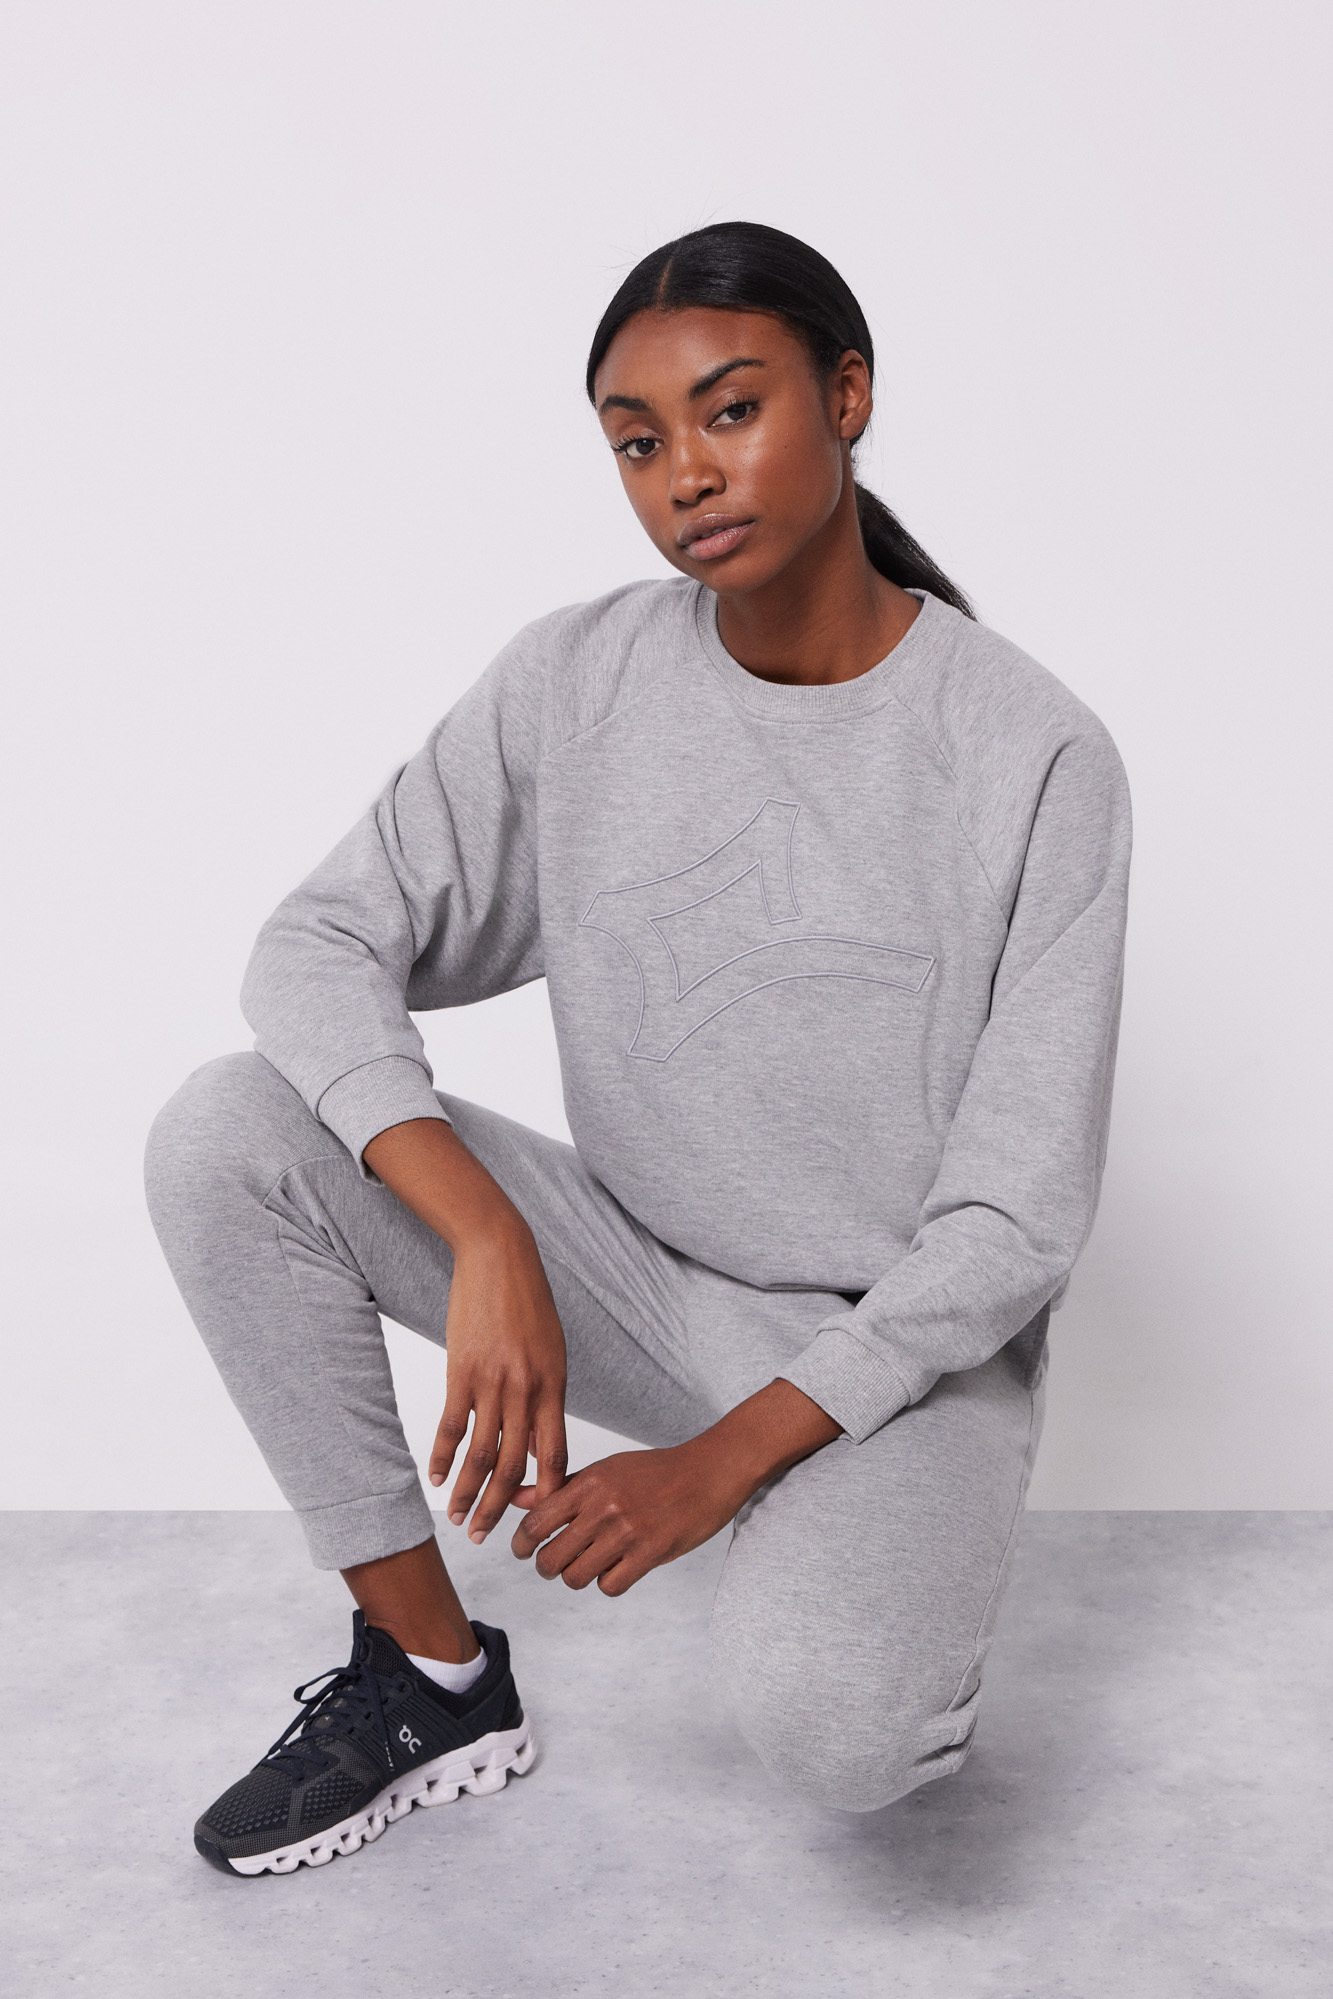 Grey cotton joggers | Sports leggings and trousers for women | WomenSecret